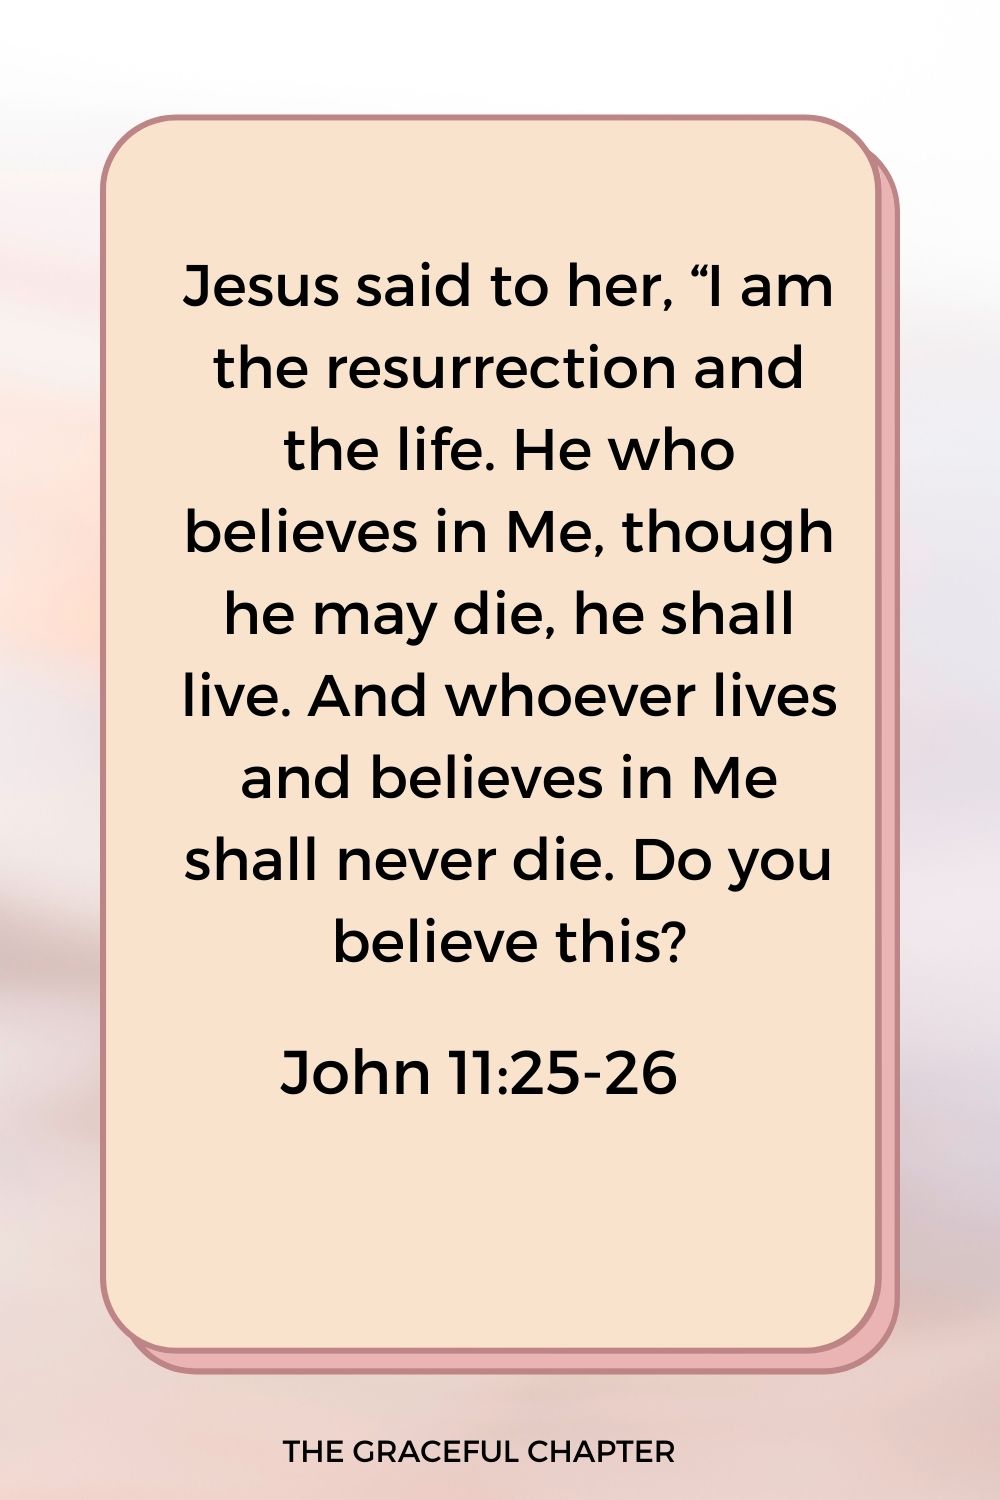 Jesus said to her, “I am the resurrection and the life. He who believes in Me, though he may die, he shall live. And whoever lives and believes in Me shall never die. Do you believe this? John 11:25-26